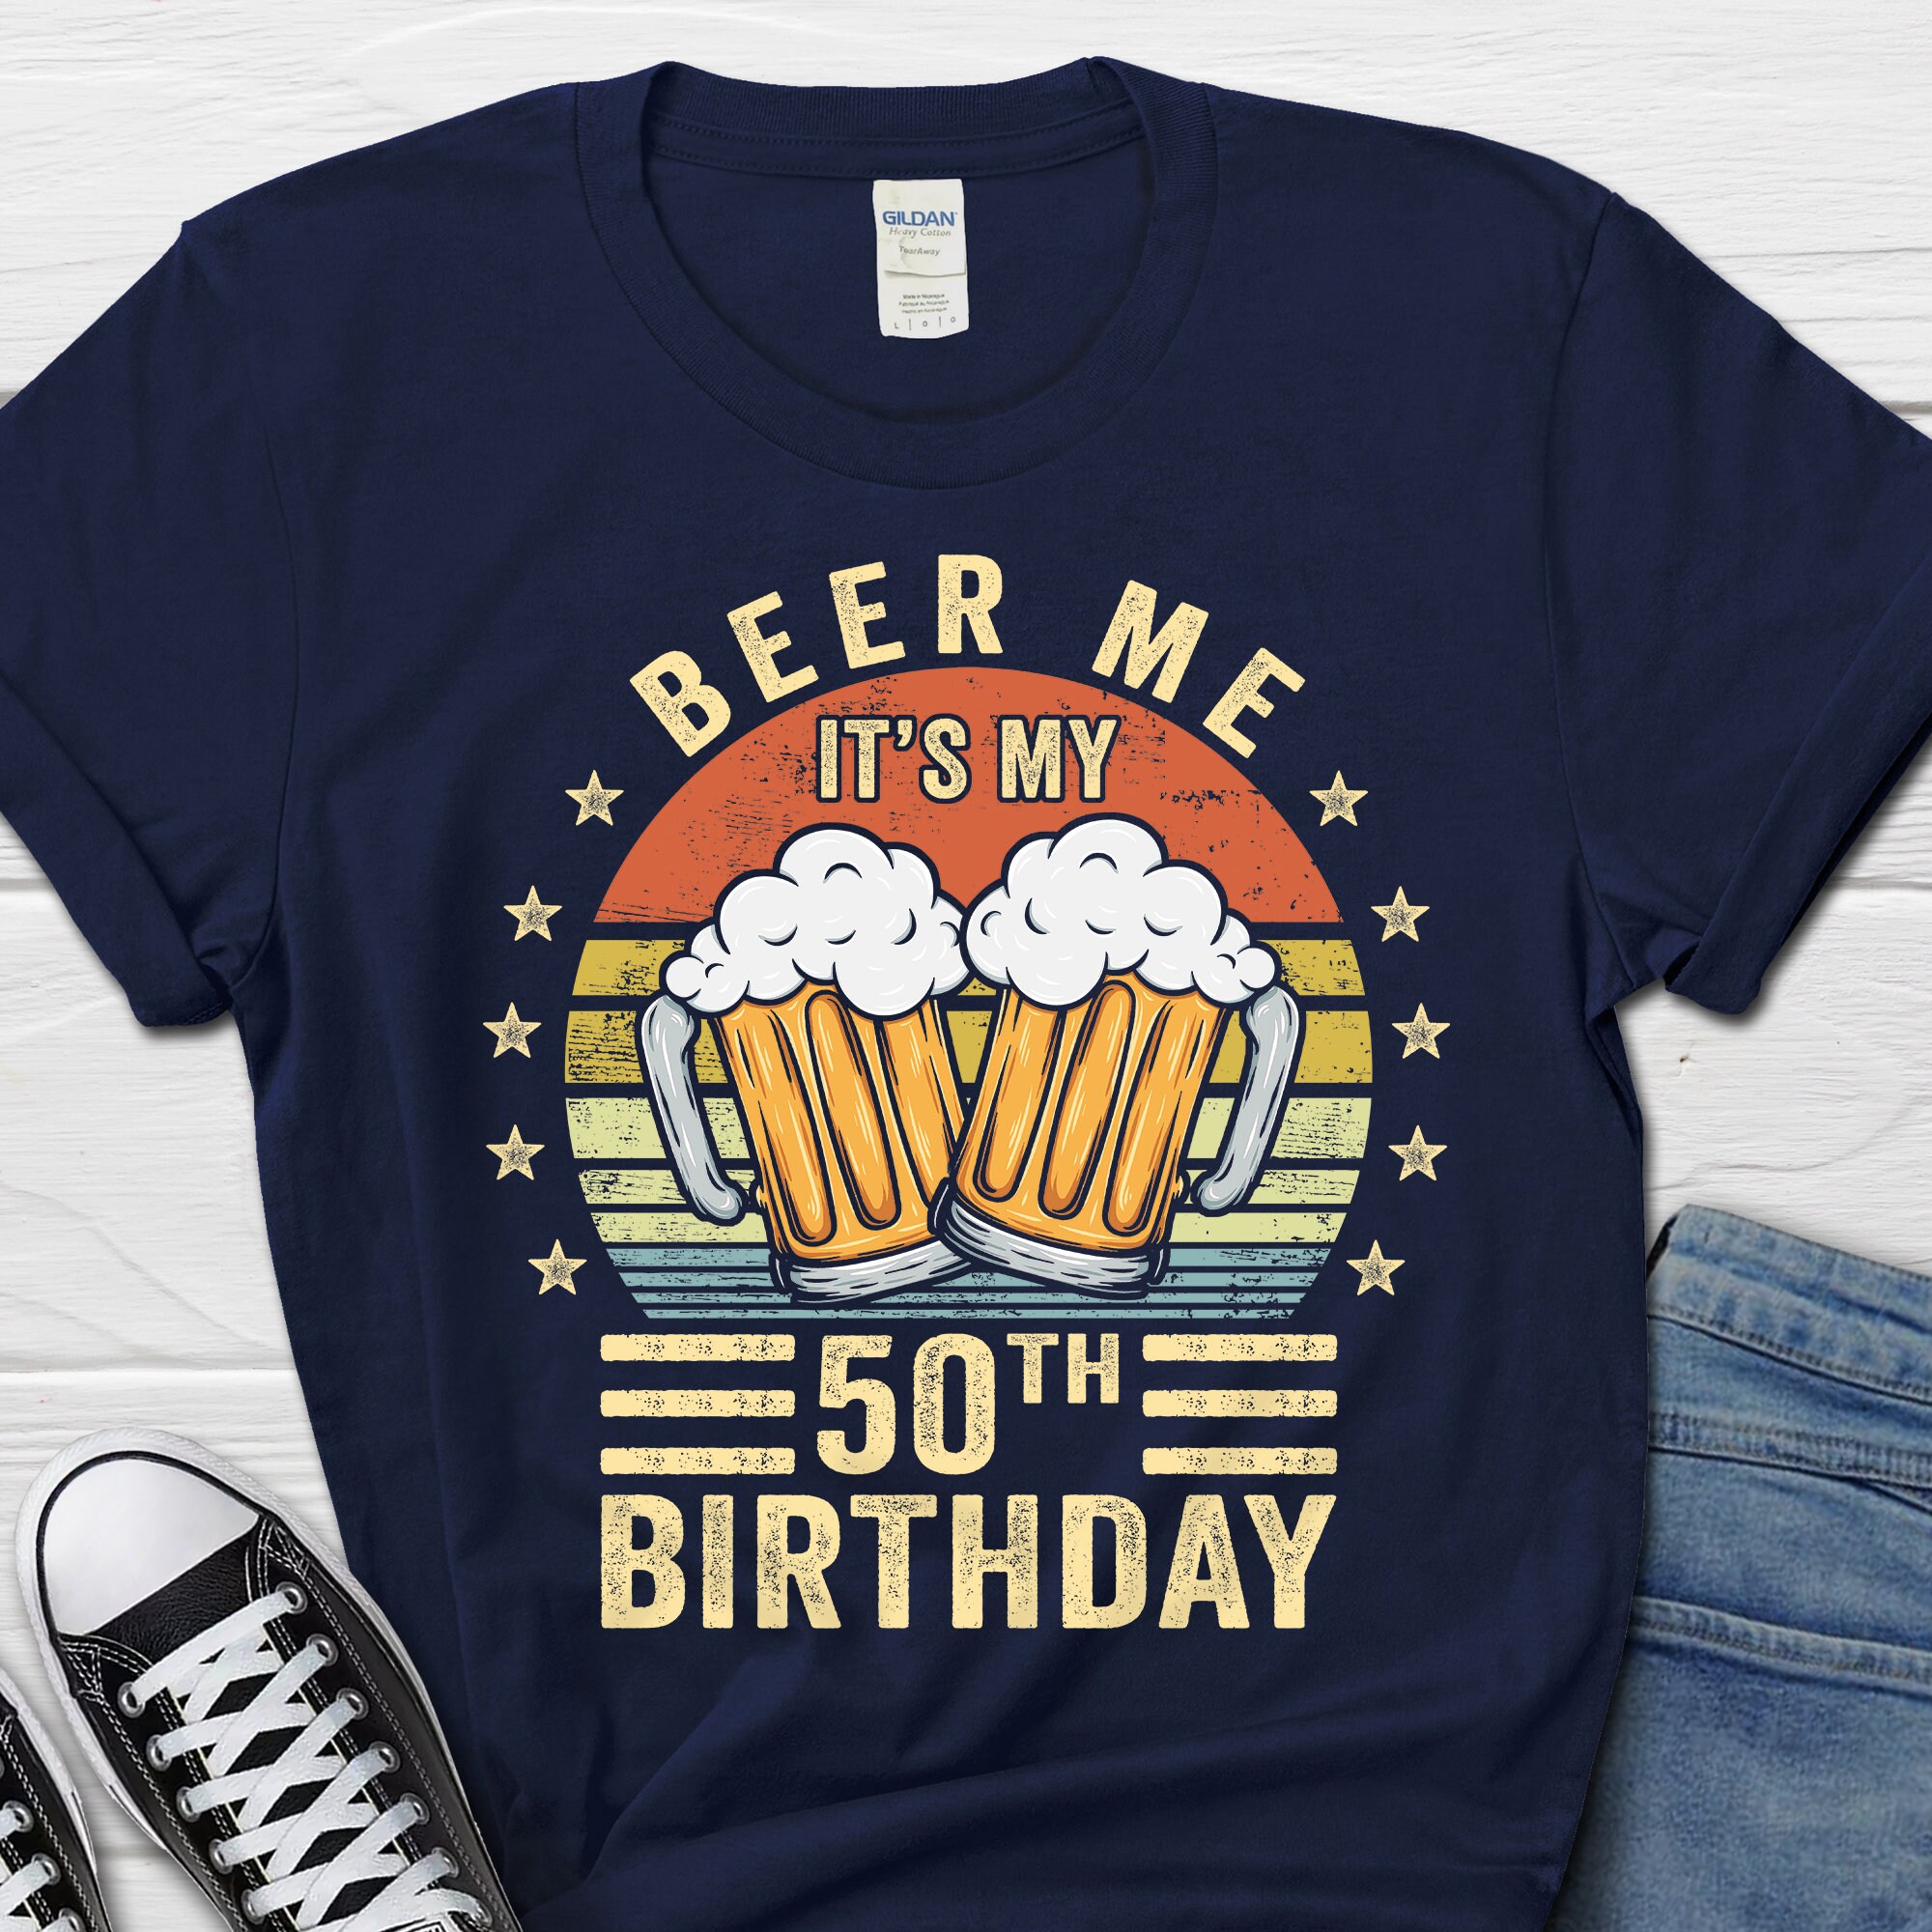 Discover Beer Me It's My 50th Birthday Shirt, 50th Birthday Vintage Gift, 50 Birthday T-Shirt